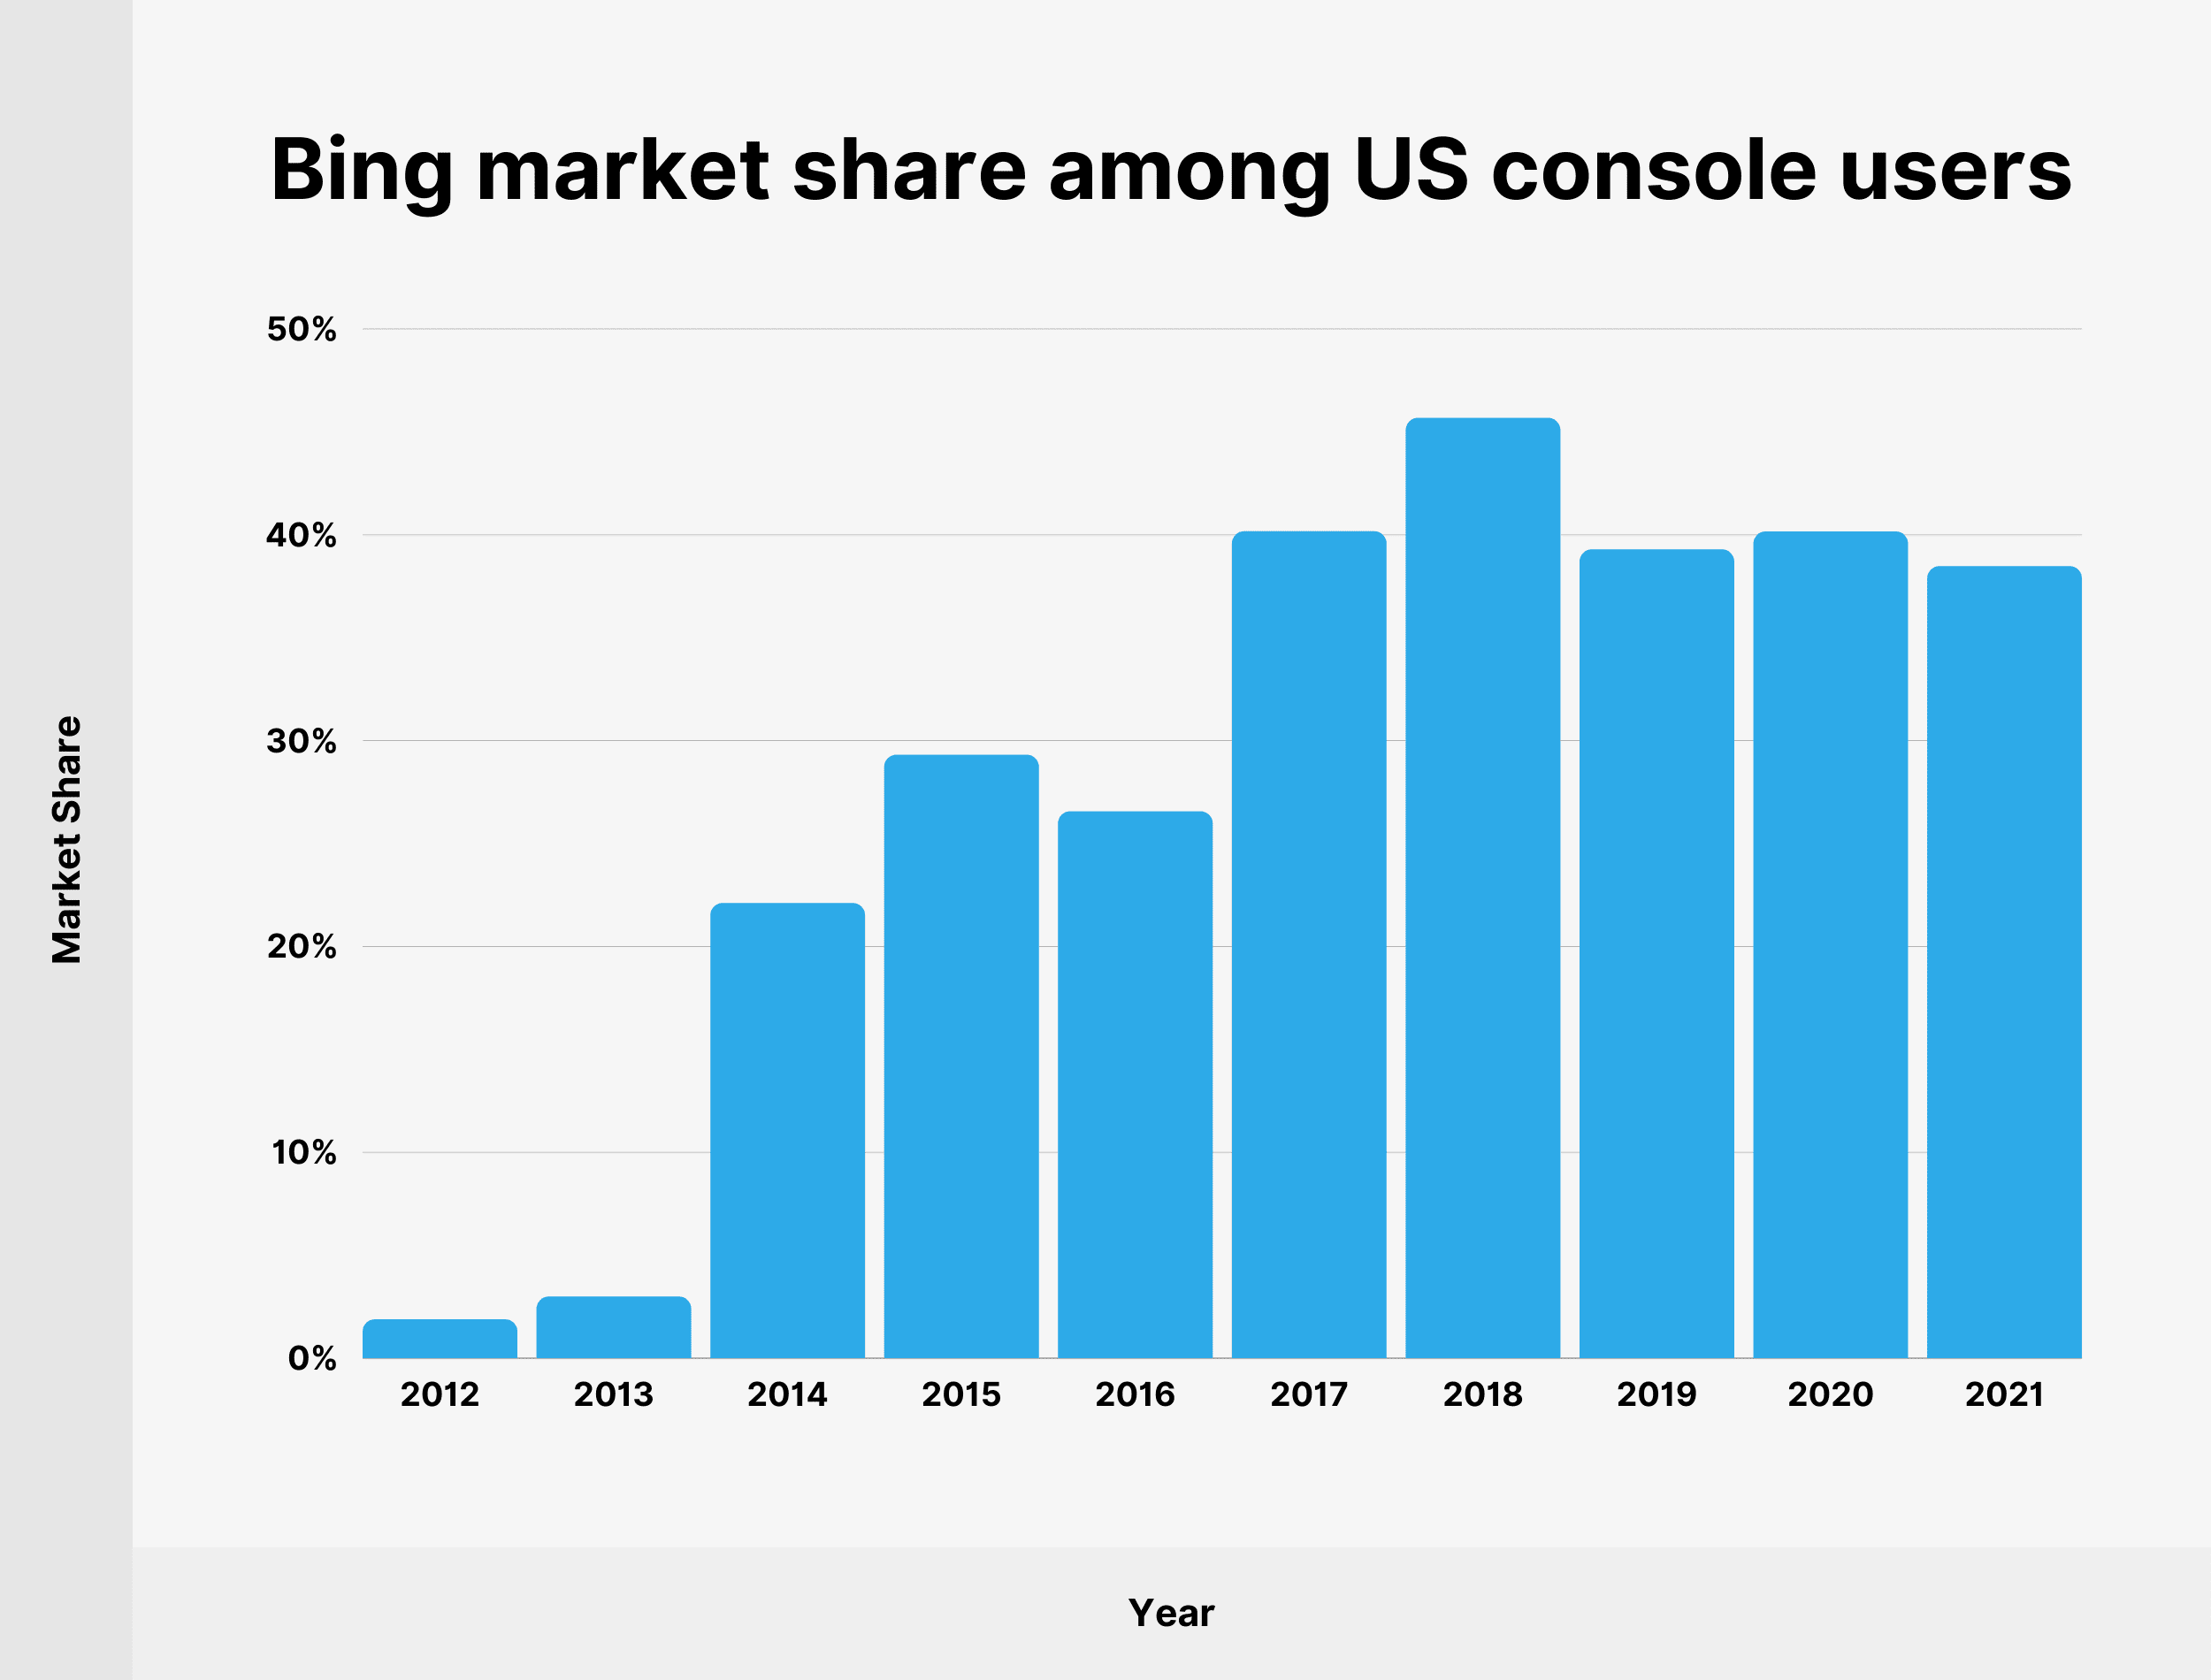 Bing market share among US console users